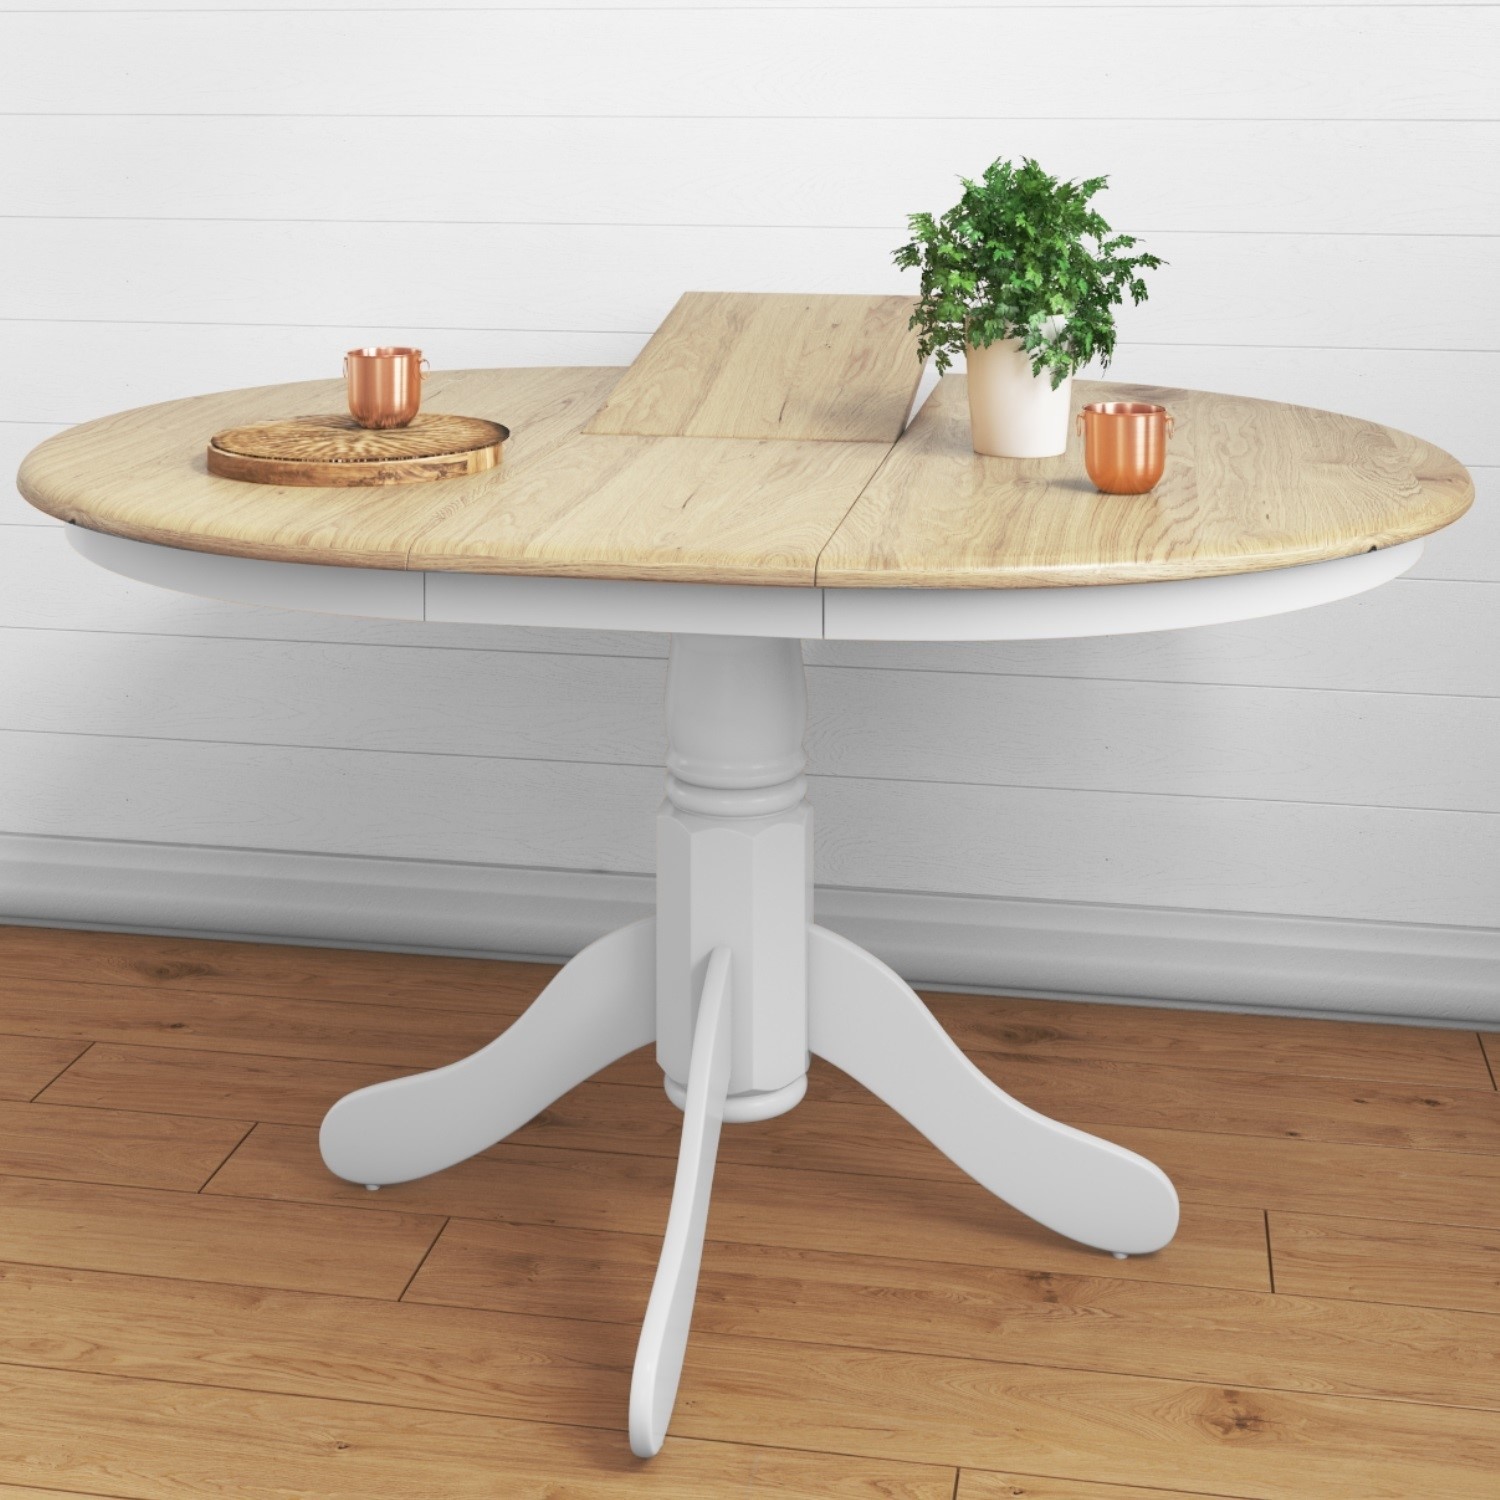 Round Extendable Dining Table In White Oak Effect Seats 6 Rhode Island Furniture123